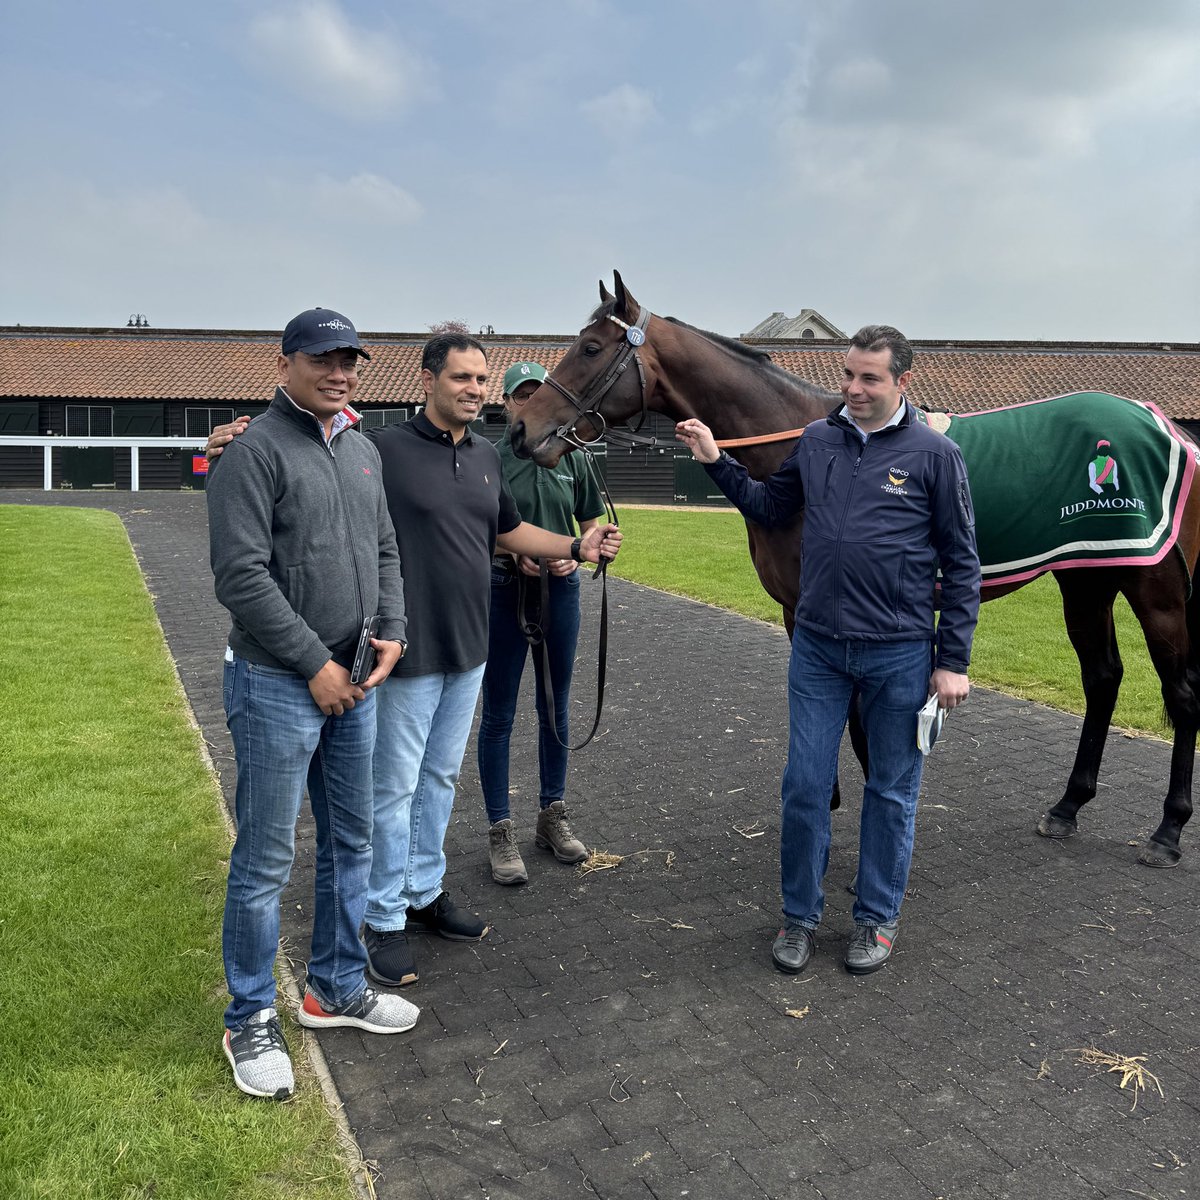 New Approach Bloodstock (@ajay_anne) buys BRAKEMAN (GB) from Juddmonte for Emirati owner @salrahoomi at the @Tattersalls1766 Guineas HIT Sale. @MarcoBotti will train the KINGMAN (GB) colt. The team bought recent Dubai Racing Carnival winner ROYAL DUBAI this week last year. 🇦🇪🇬🇧